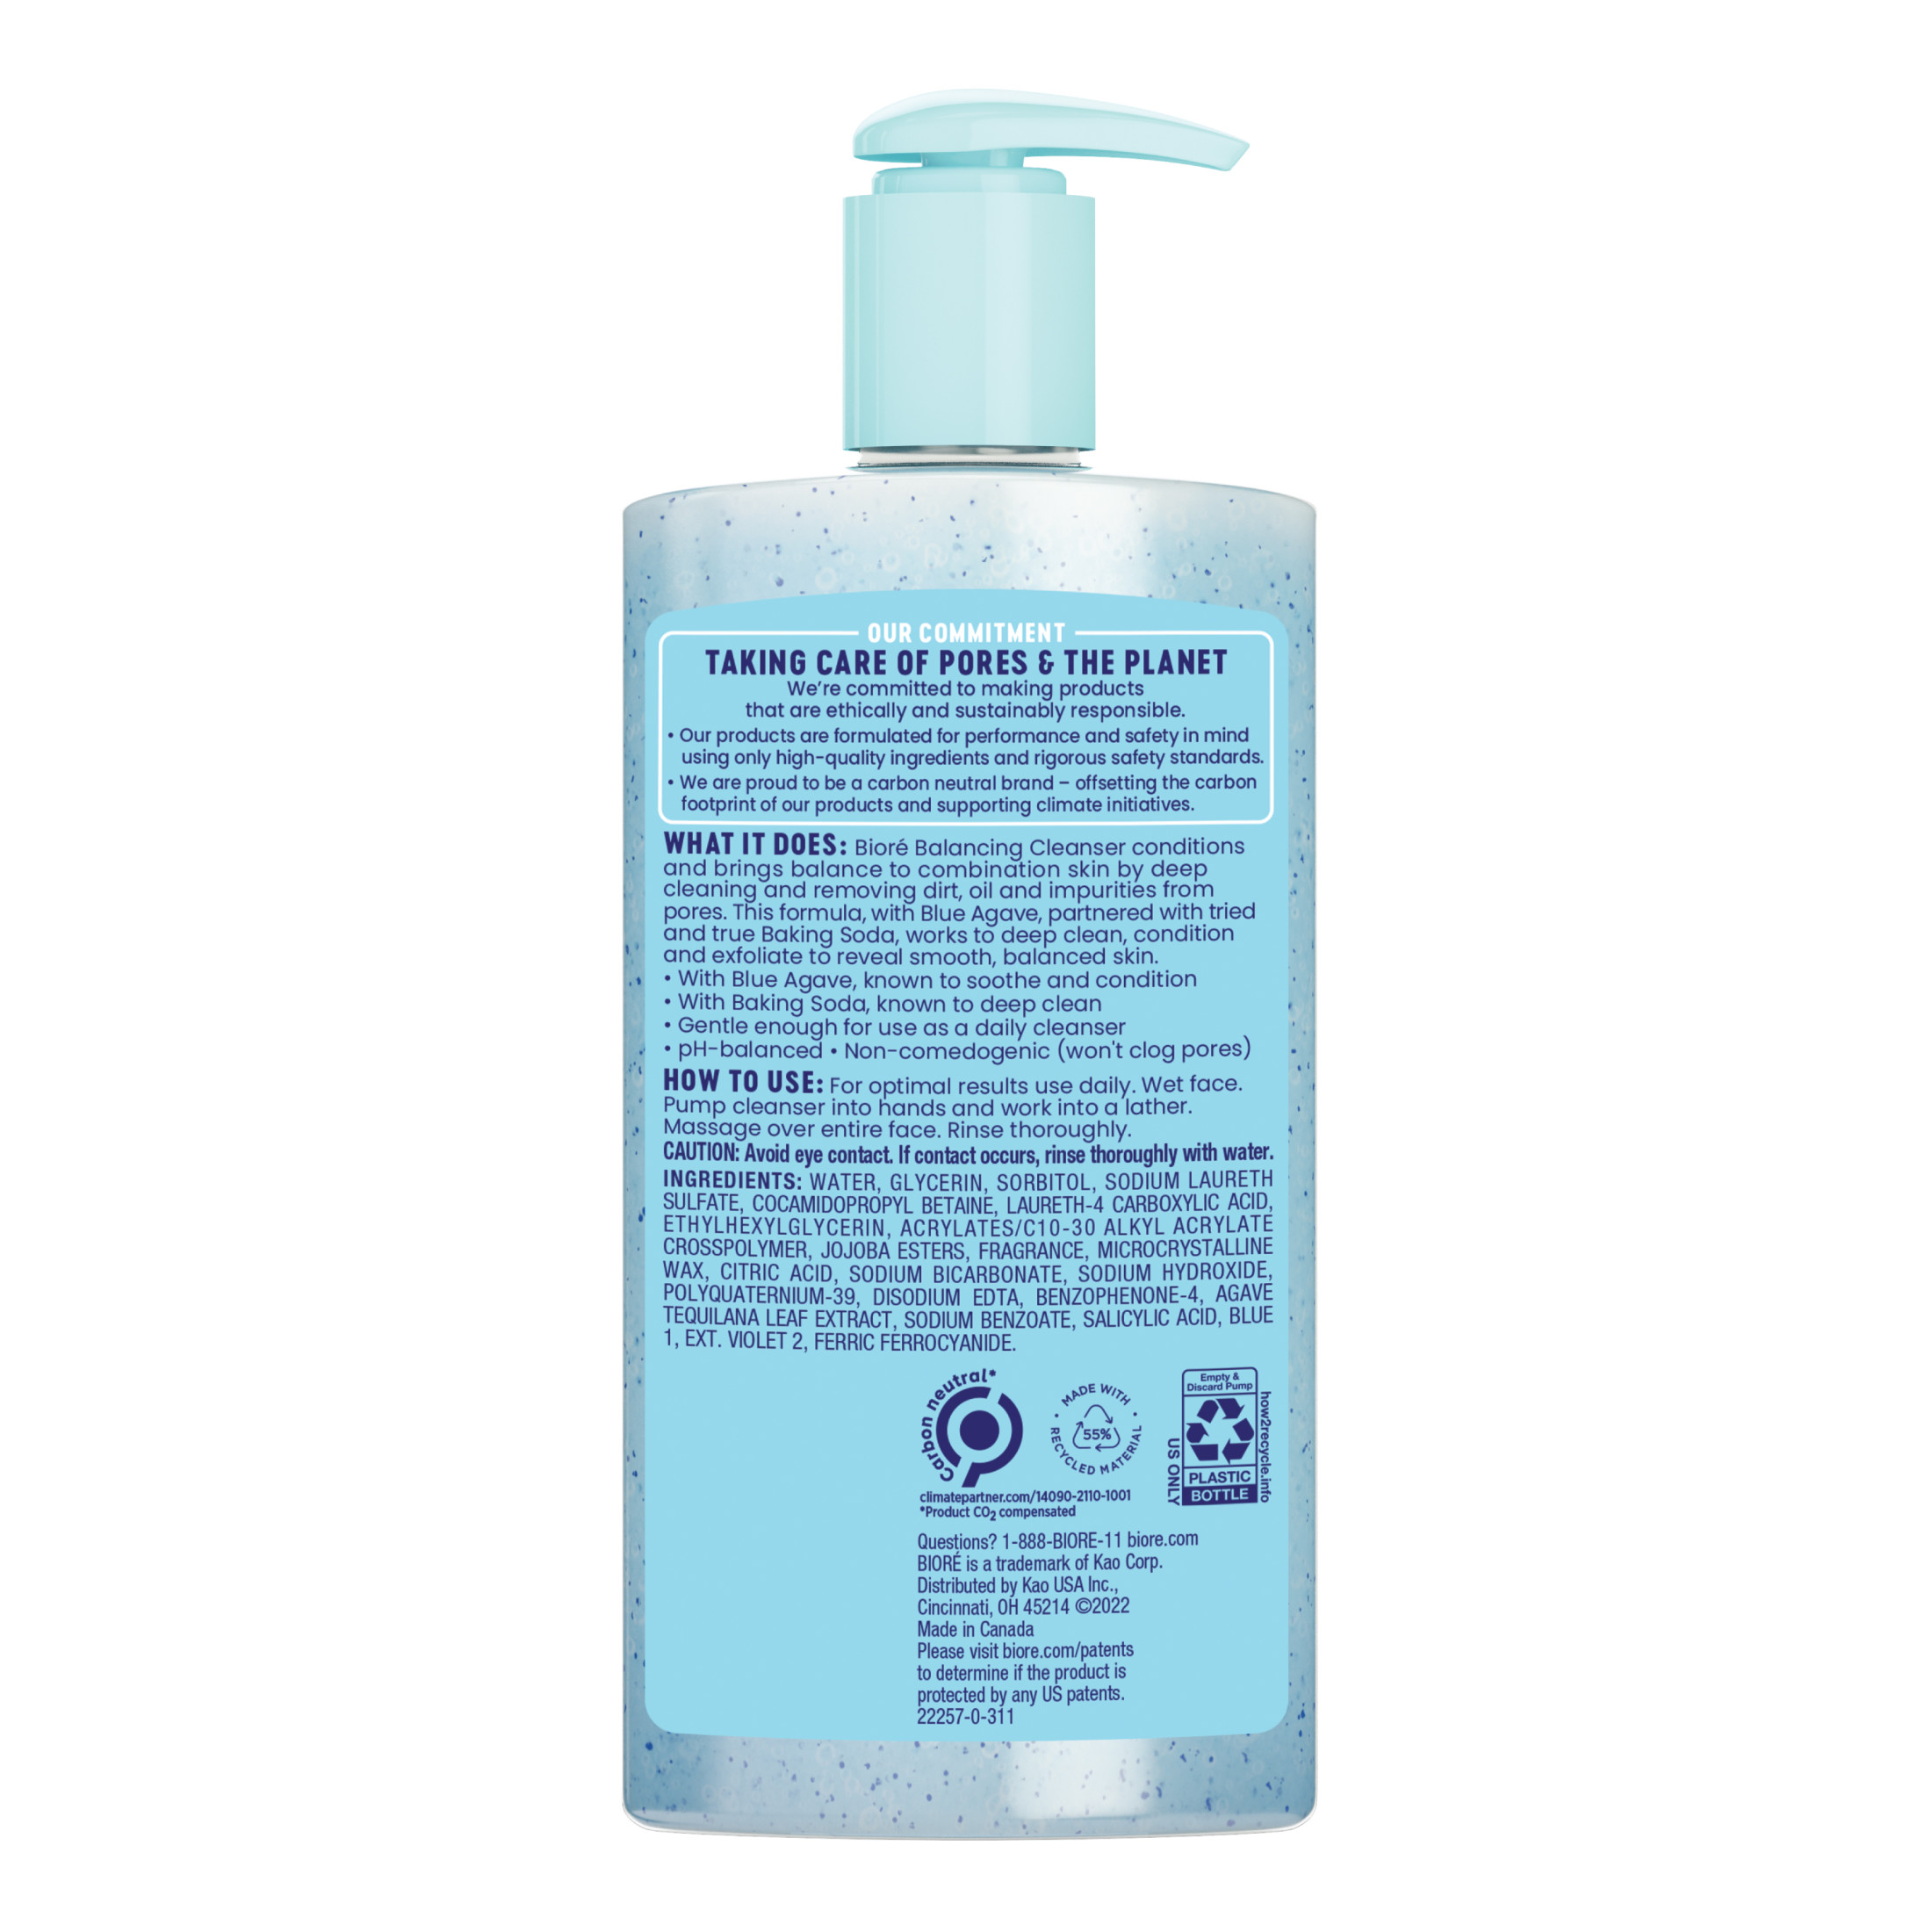 Biore Balancing Face Wash, PH Balanced Face Cleanser, Combination Skin, Cruelty Free 6.77 Oz - image 11 of 11